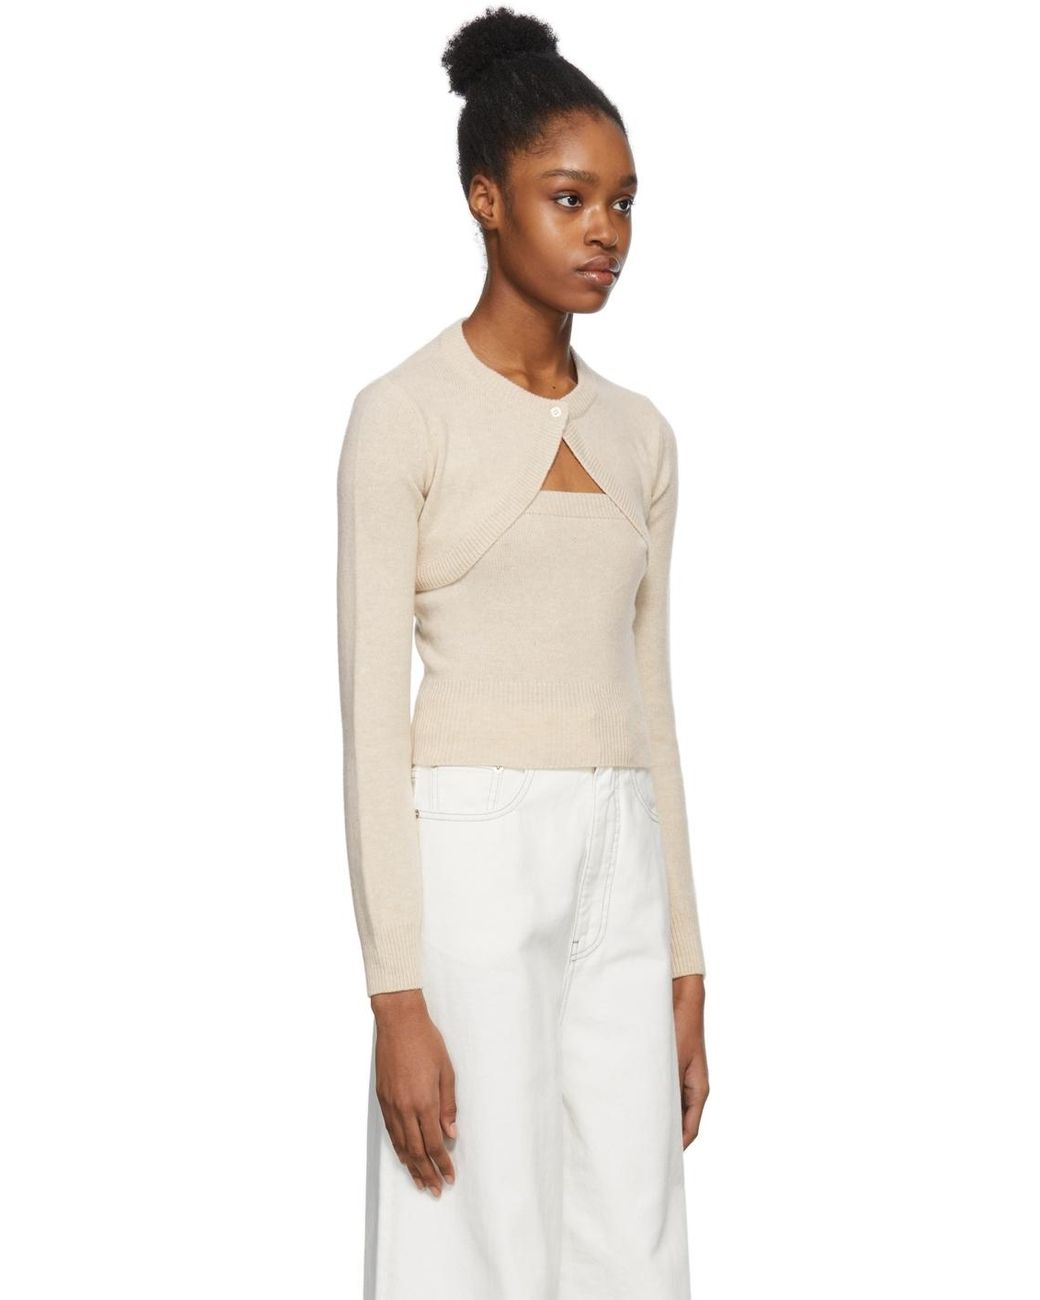 Deveaux New York Wool Cropped Cardigan And Top Set Womens Jumpers and knitwear Deveaux New York Jumpers and knitwear 